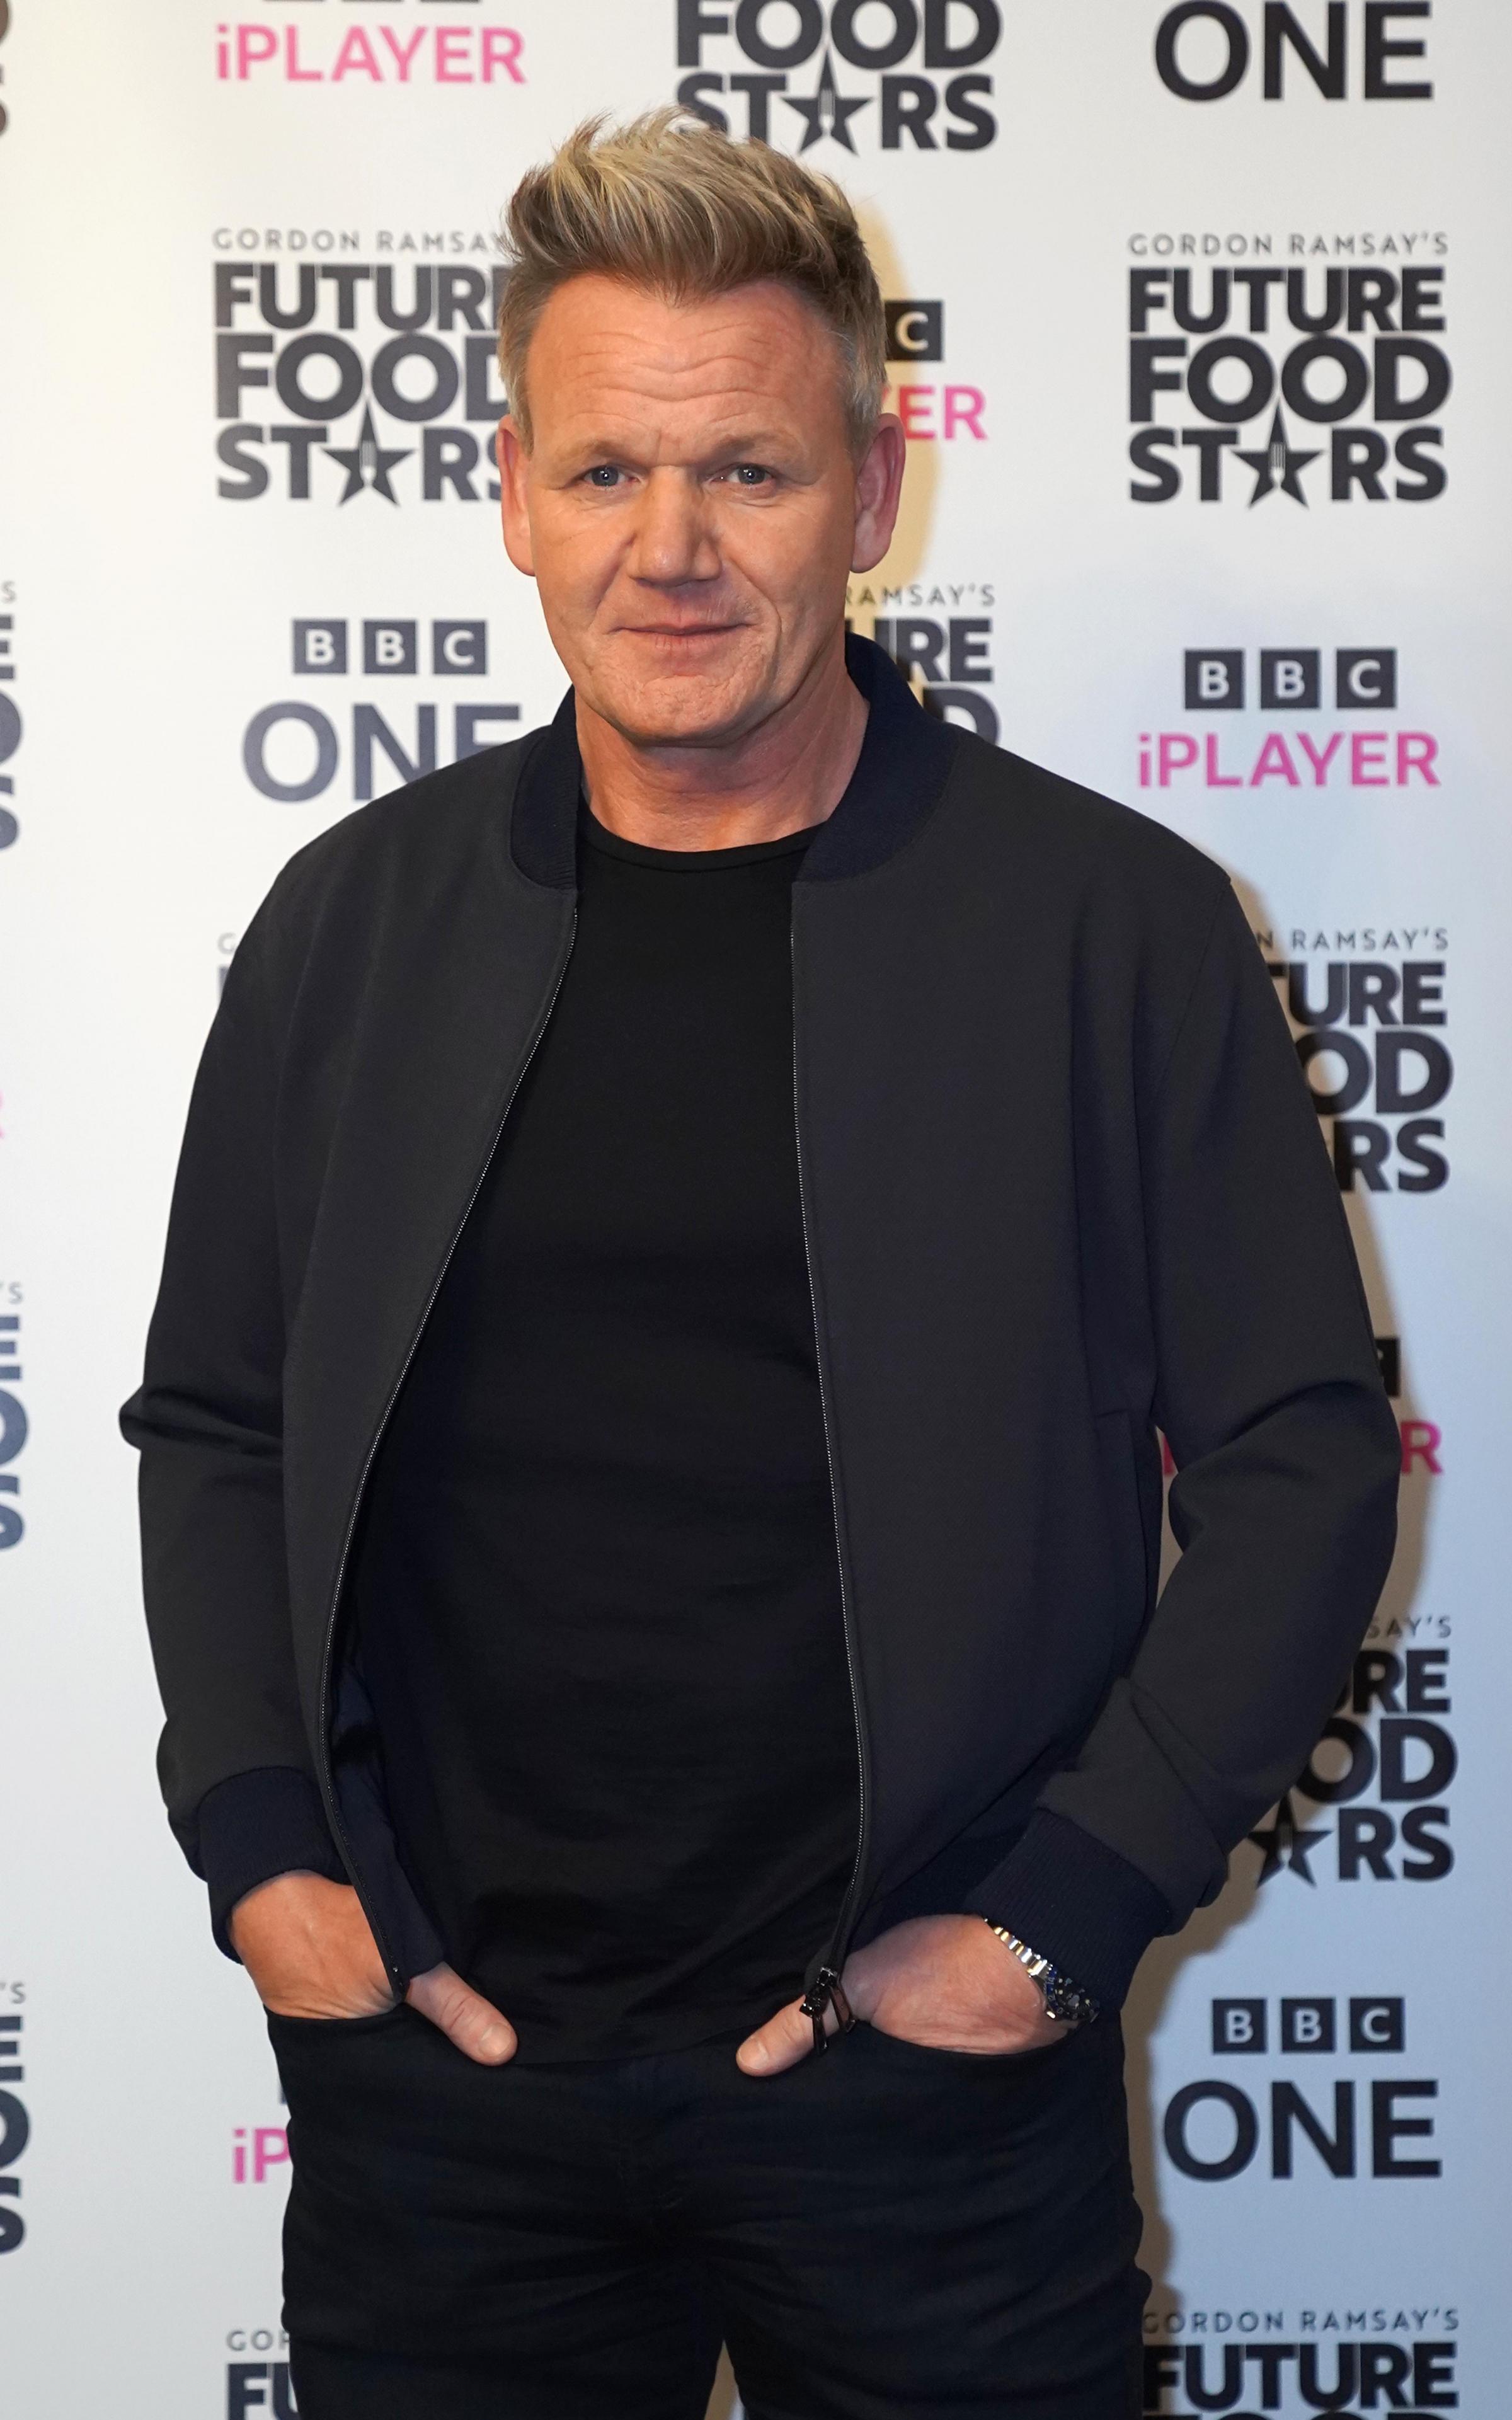 Gordon Ramsay at the launch of Gordon Ramsays Future Food Stars, a new food entertainment series for BBC One, in Soho, London. Picture date: Thursday March 10, 2022.